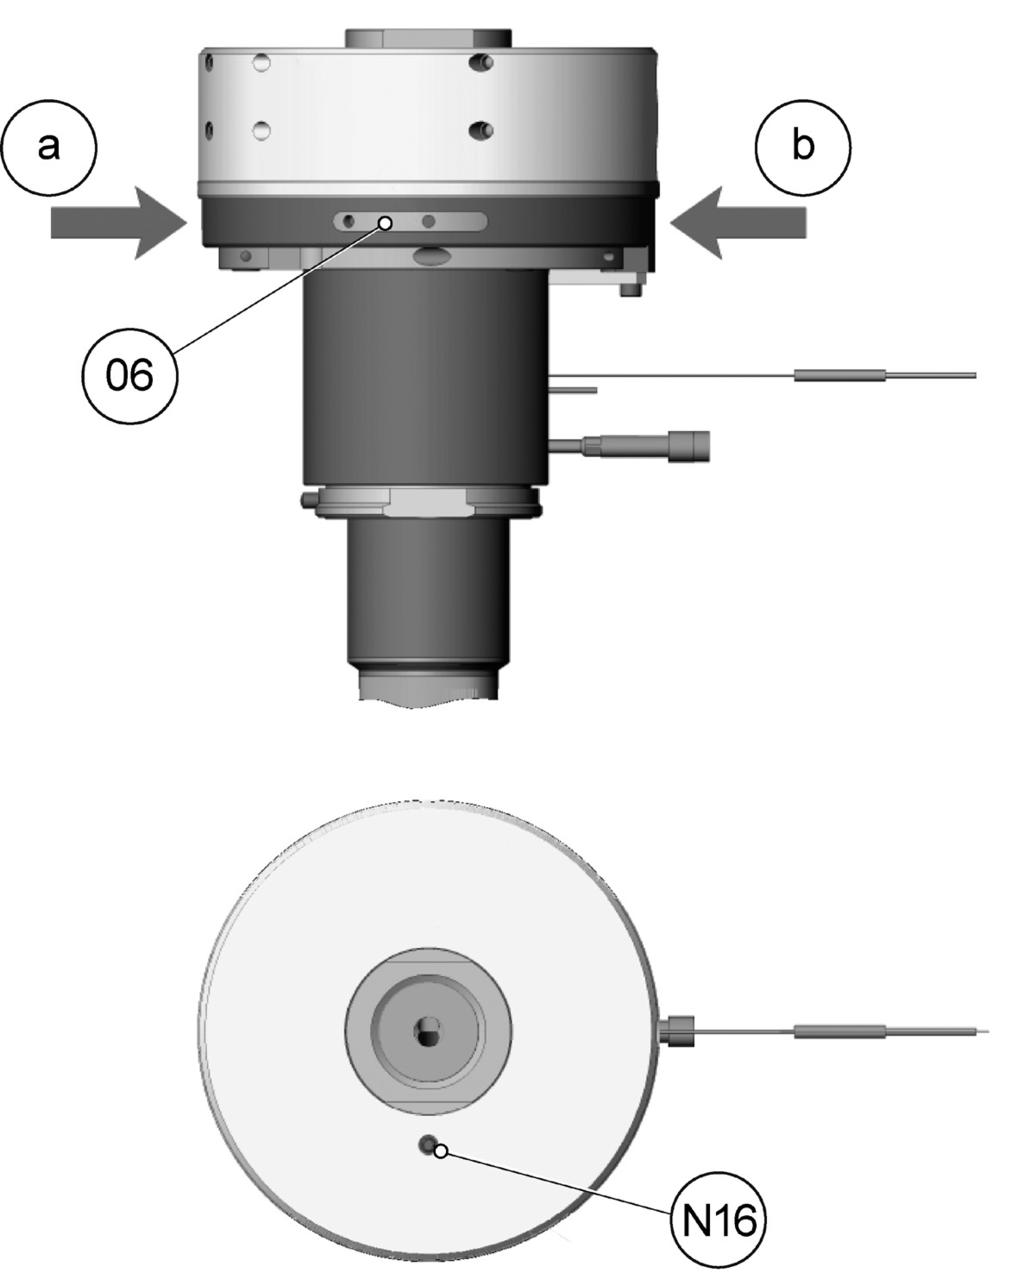 10.6.8 Valve in Height djustment 1) Drive valve pin in closed position with reduced pressurized air of approx. 2.76 bar (40 psi). 2) Unscrew the hexagon socket cap screw (N16).